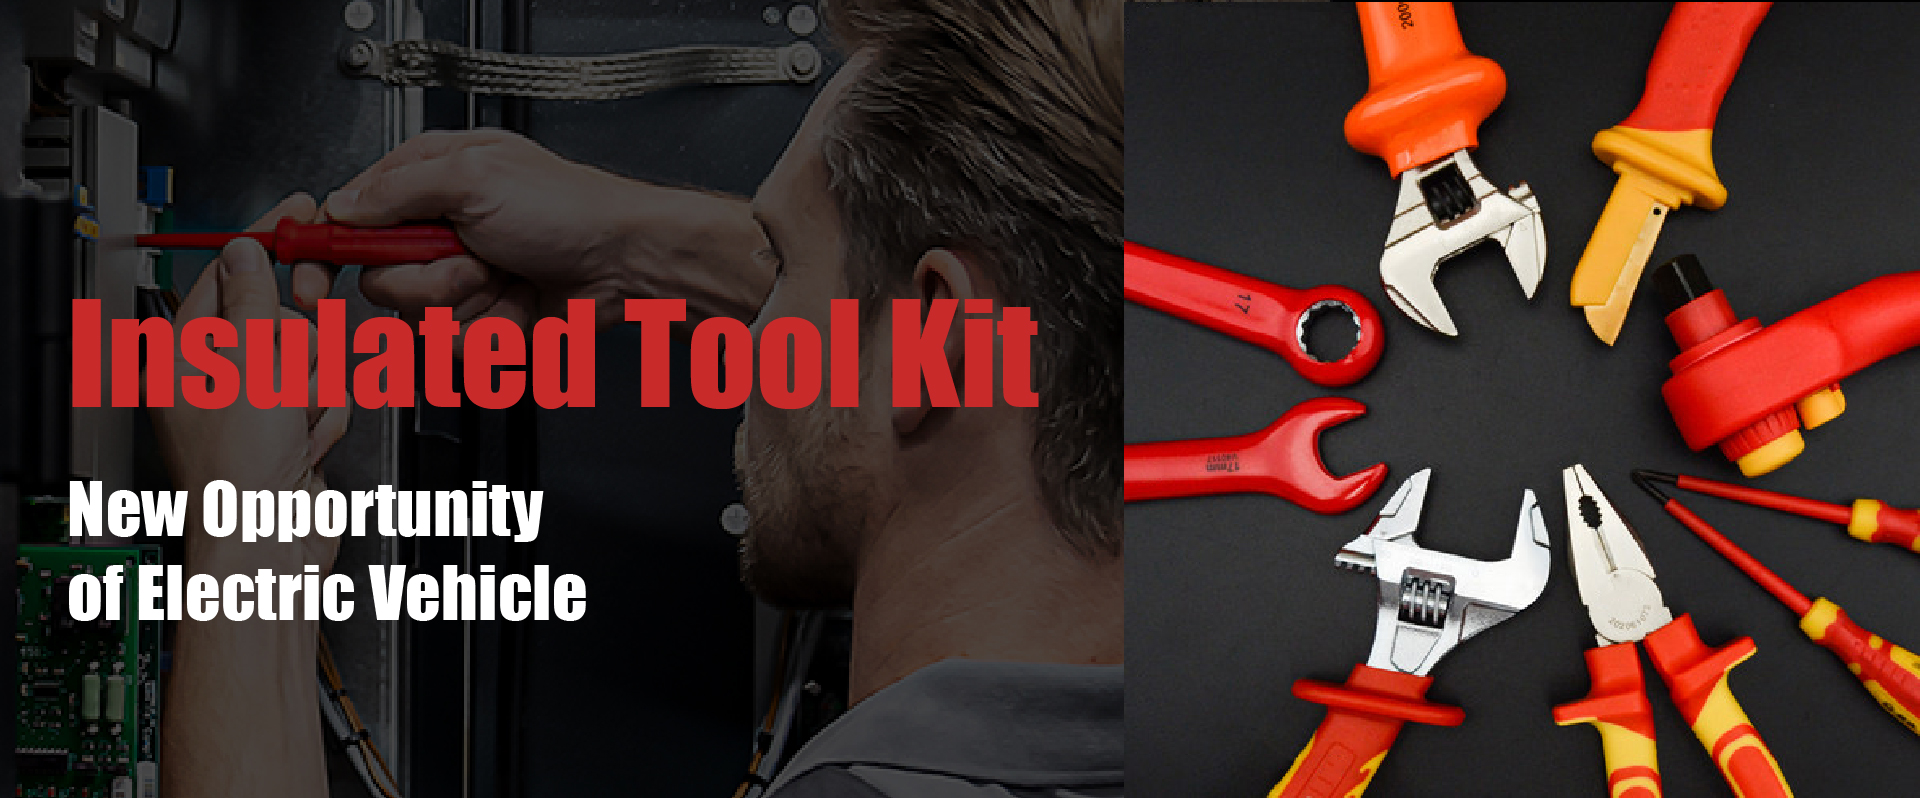 insulated tool kit